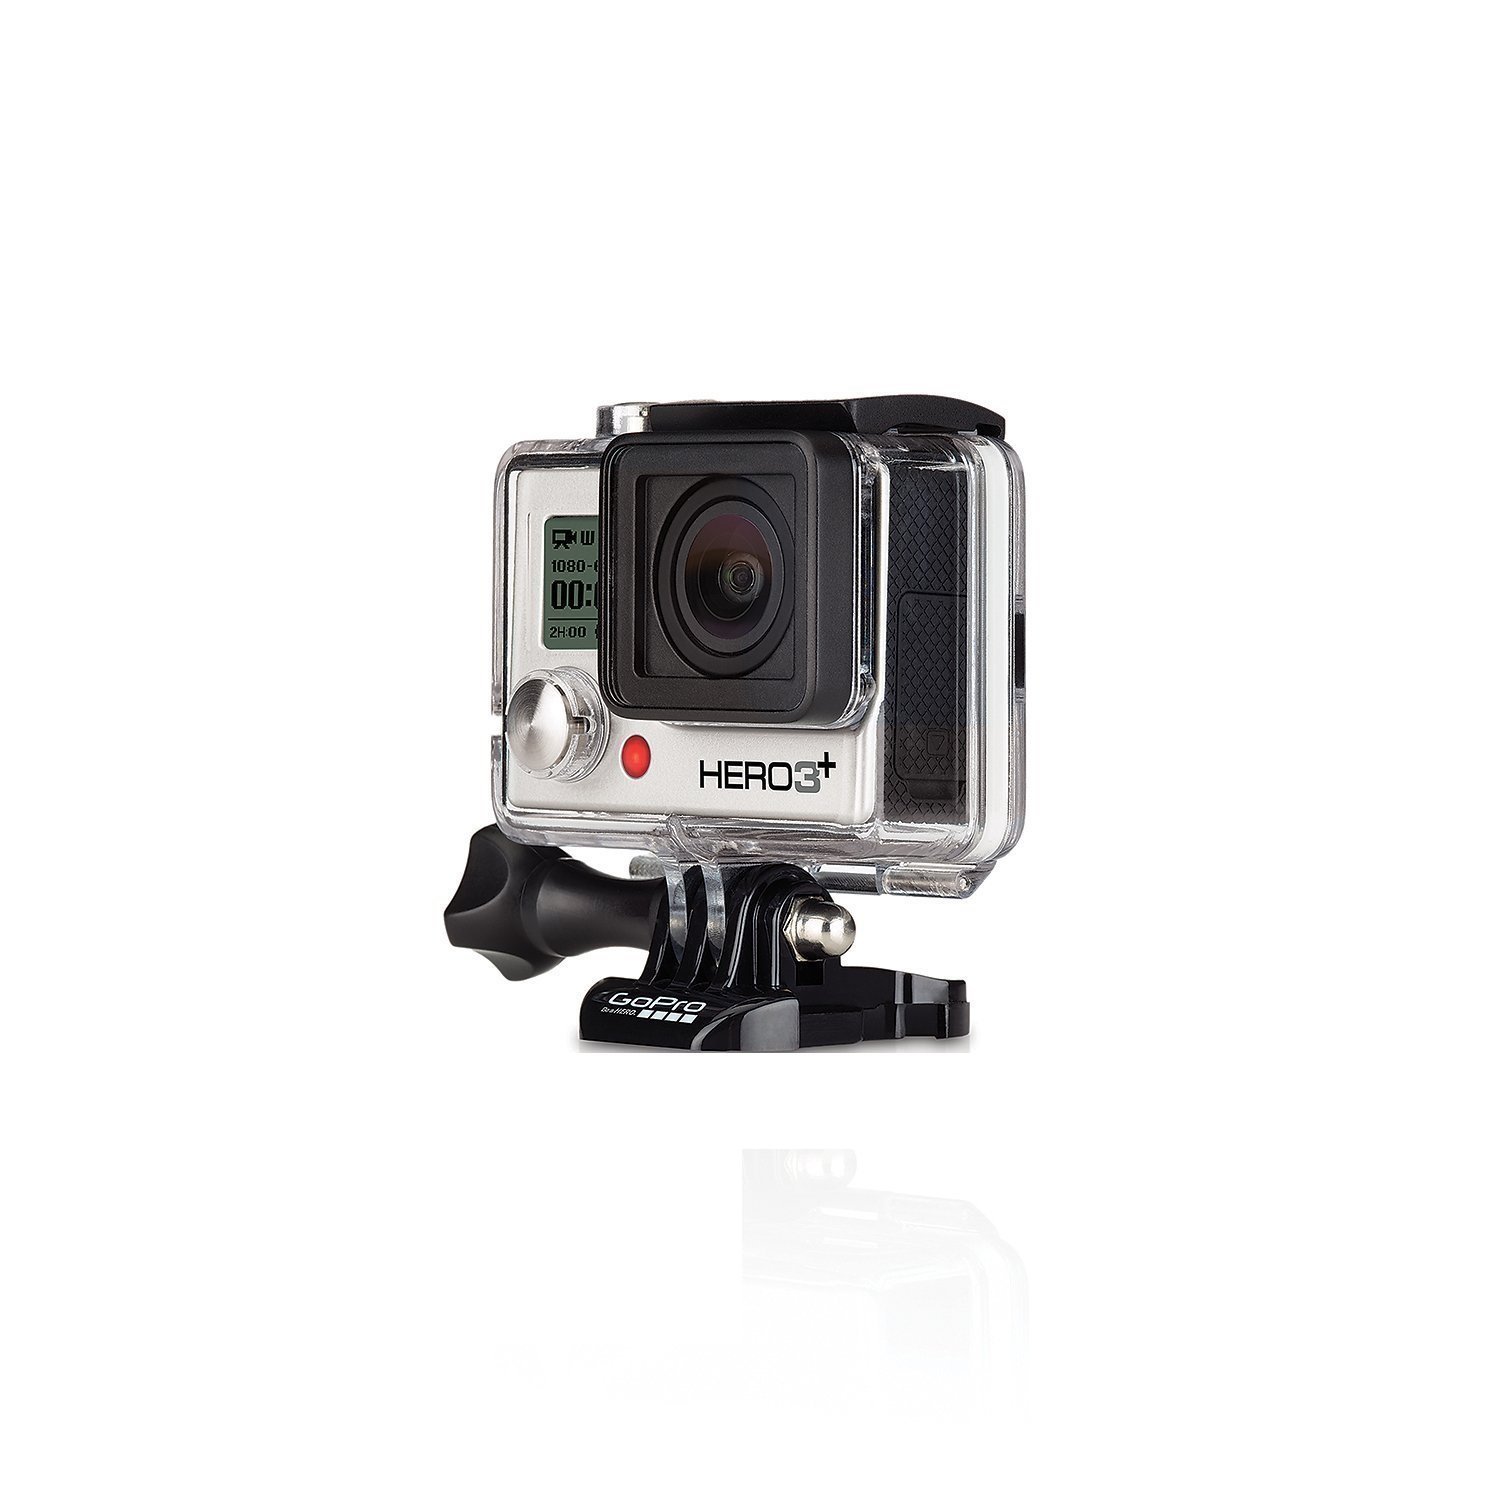 Today only: Refurbished GoPro Hero3+ silver waterproof camera for $85